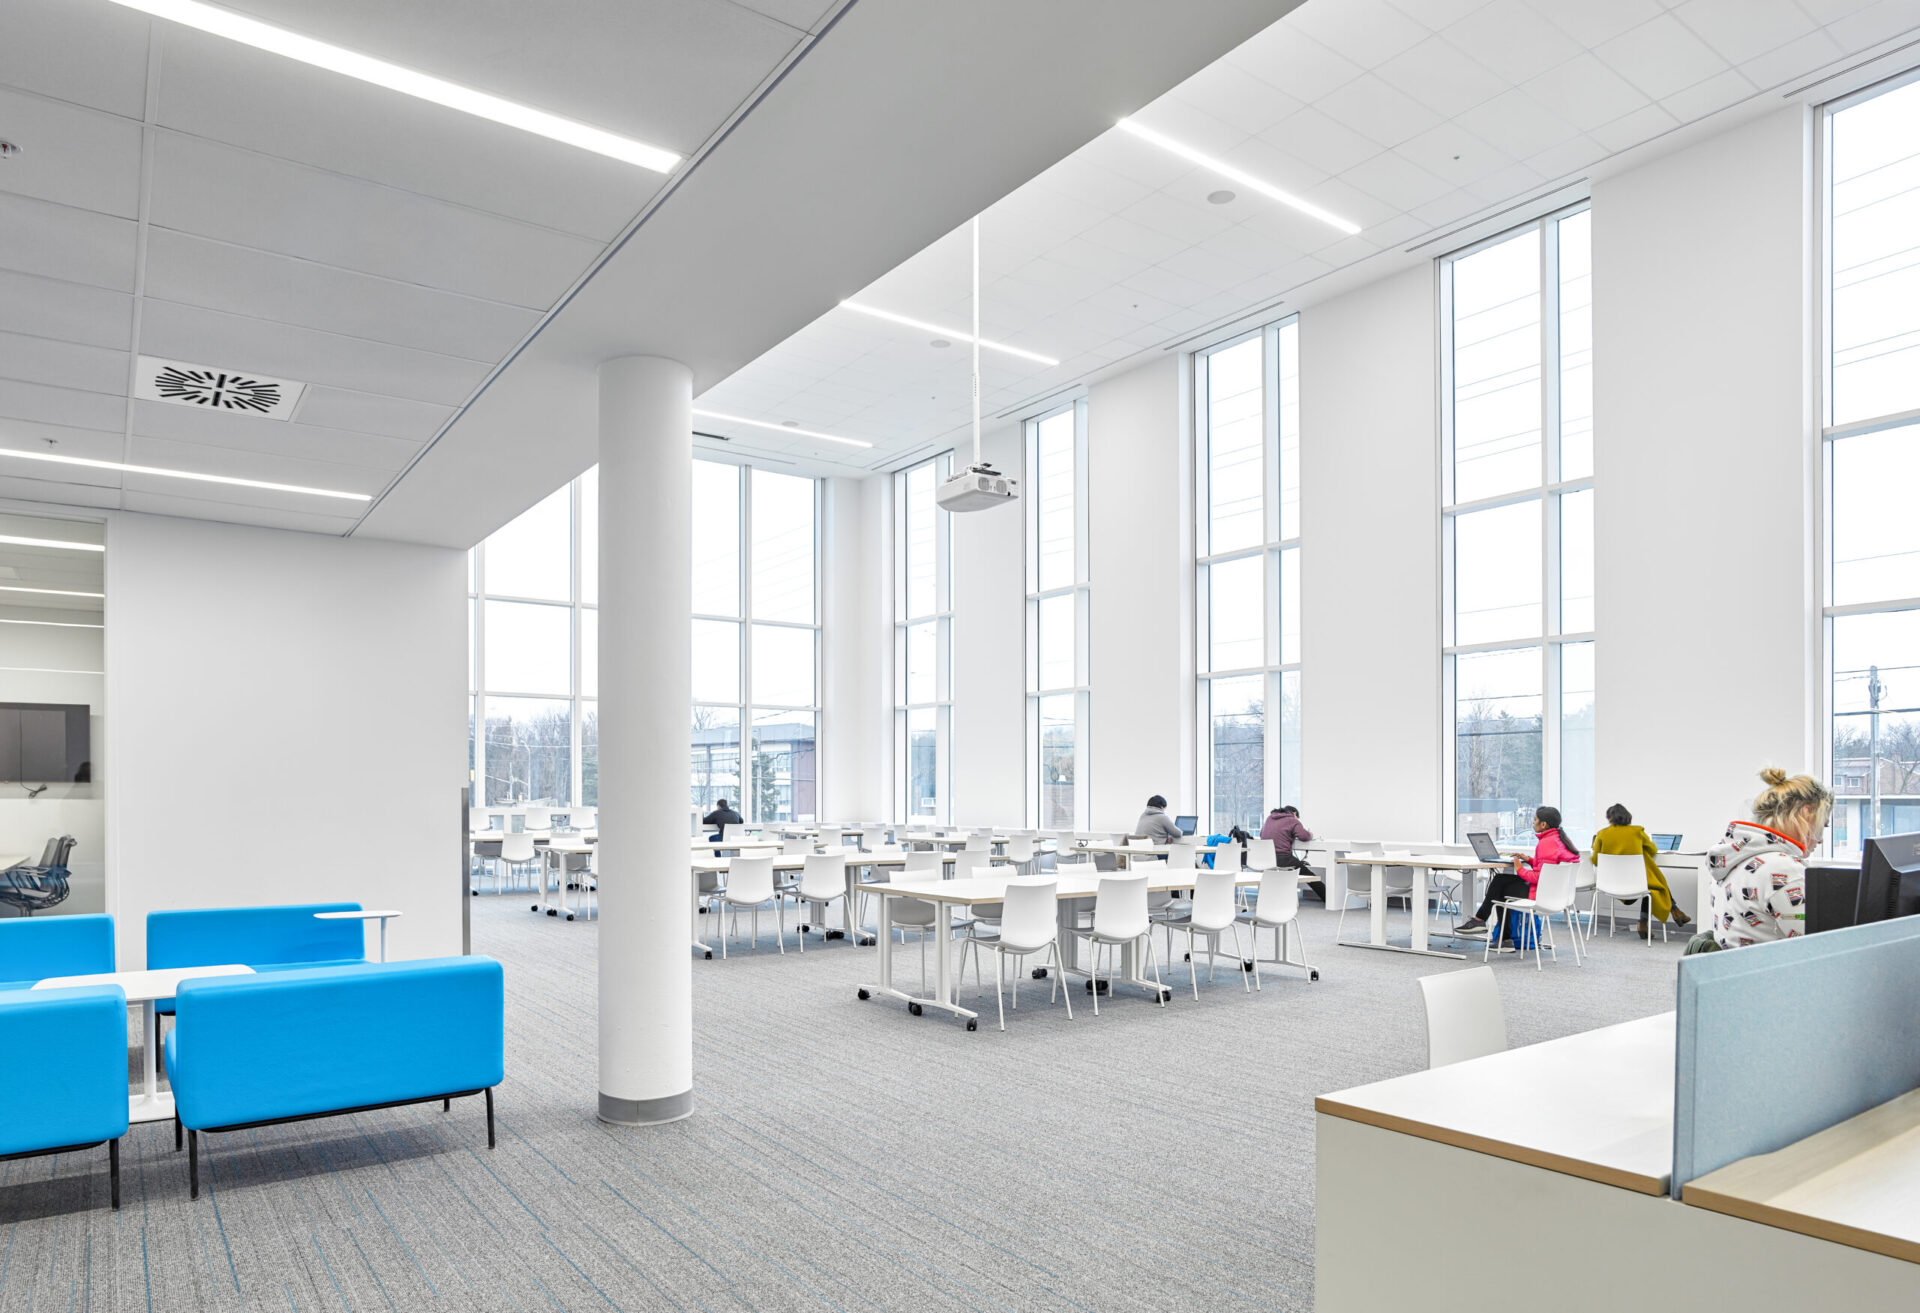 A spacious open space with blue tables and chairs inside a building.